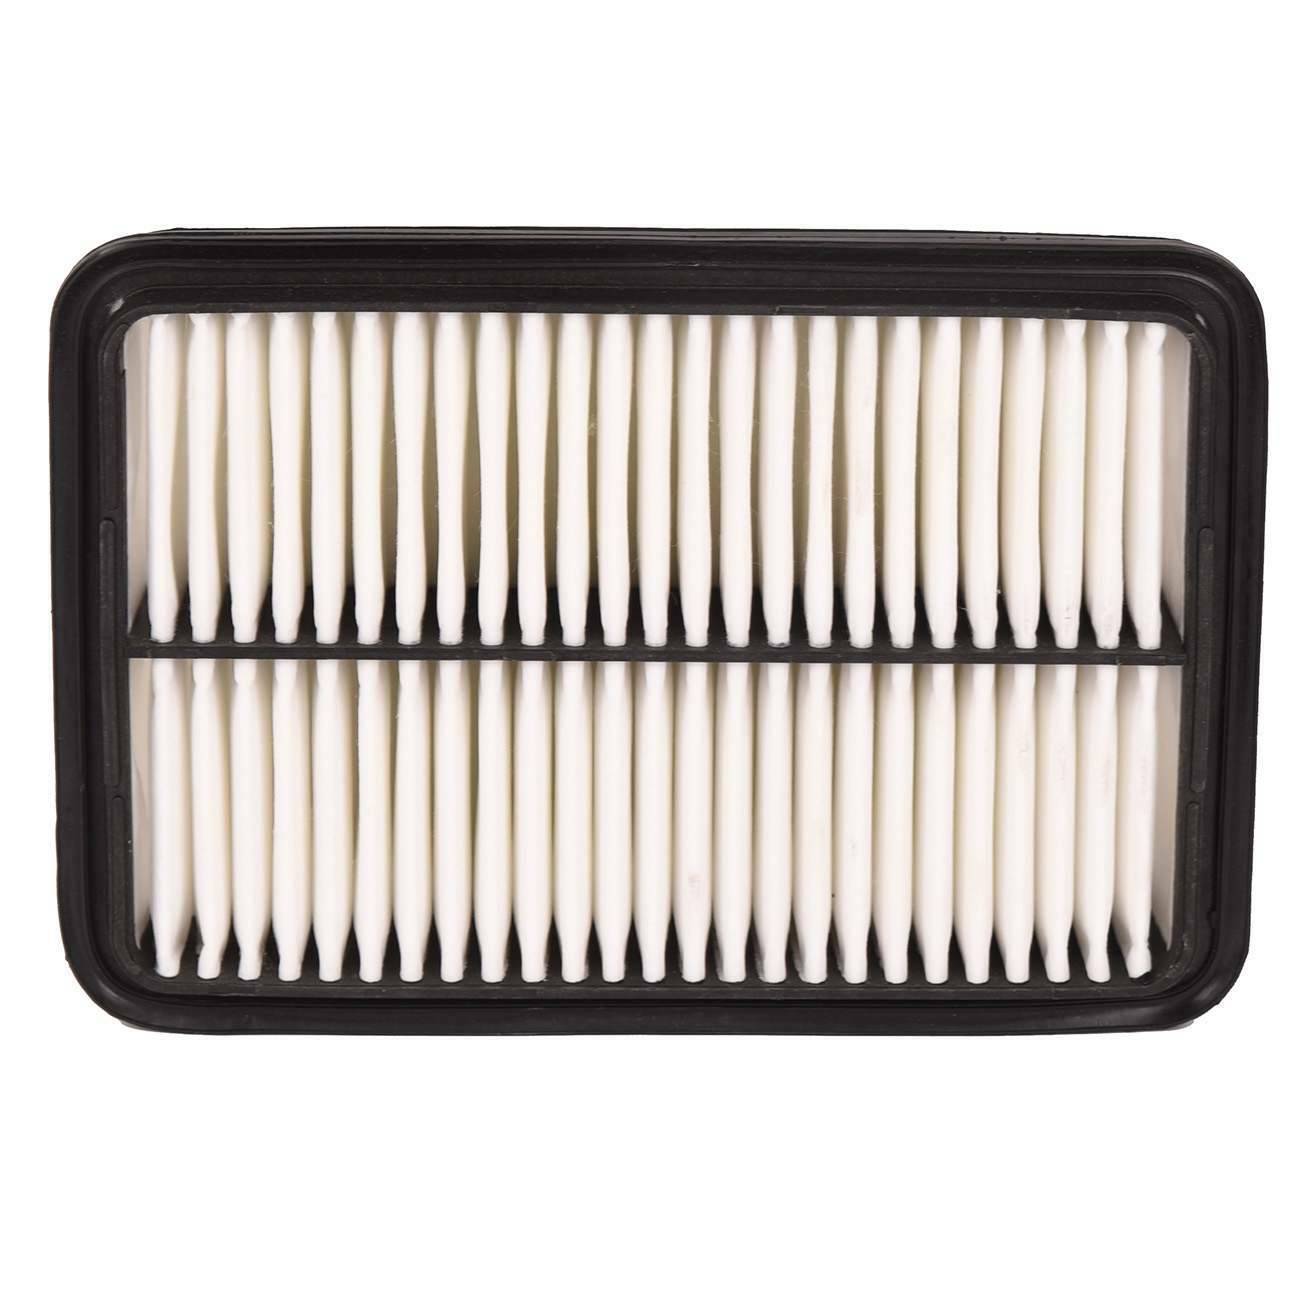 Engine Air Filter 17801-35020 Fits Toyota Tacoma 4Runner Previa 2.4L 1989-2004